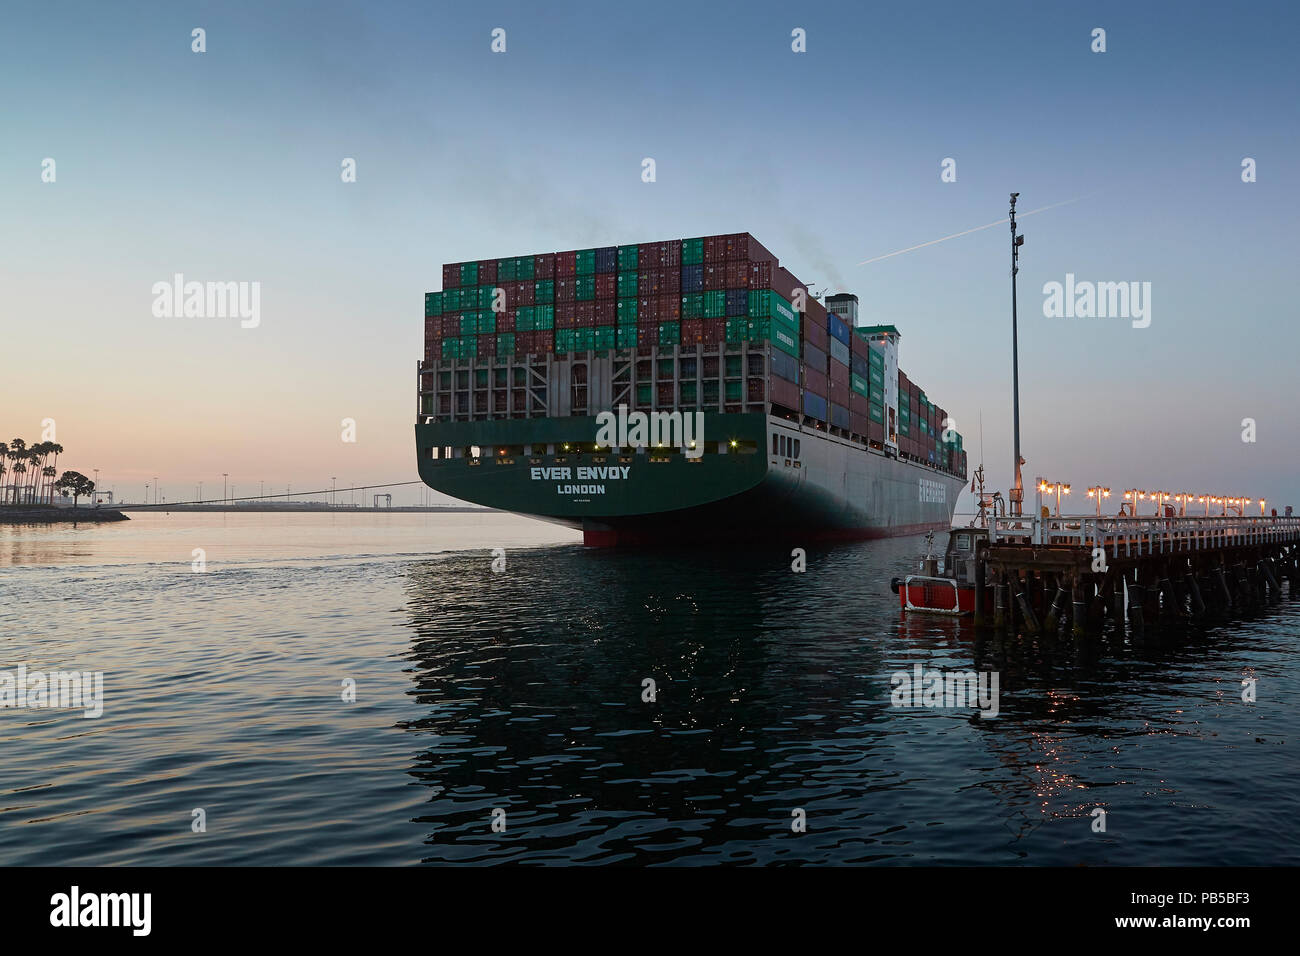 The Giant EVERGREEN Container Ship, EVER ENVOY Passes The Los Angeles Harbor Pilot Pier As She Departs The Port Of Los Angeles, California, USA. Stock Photo